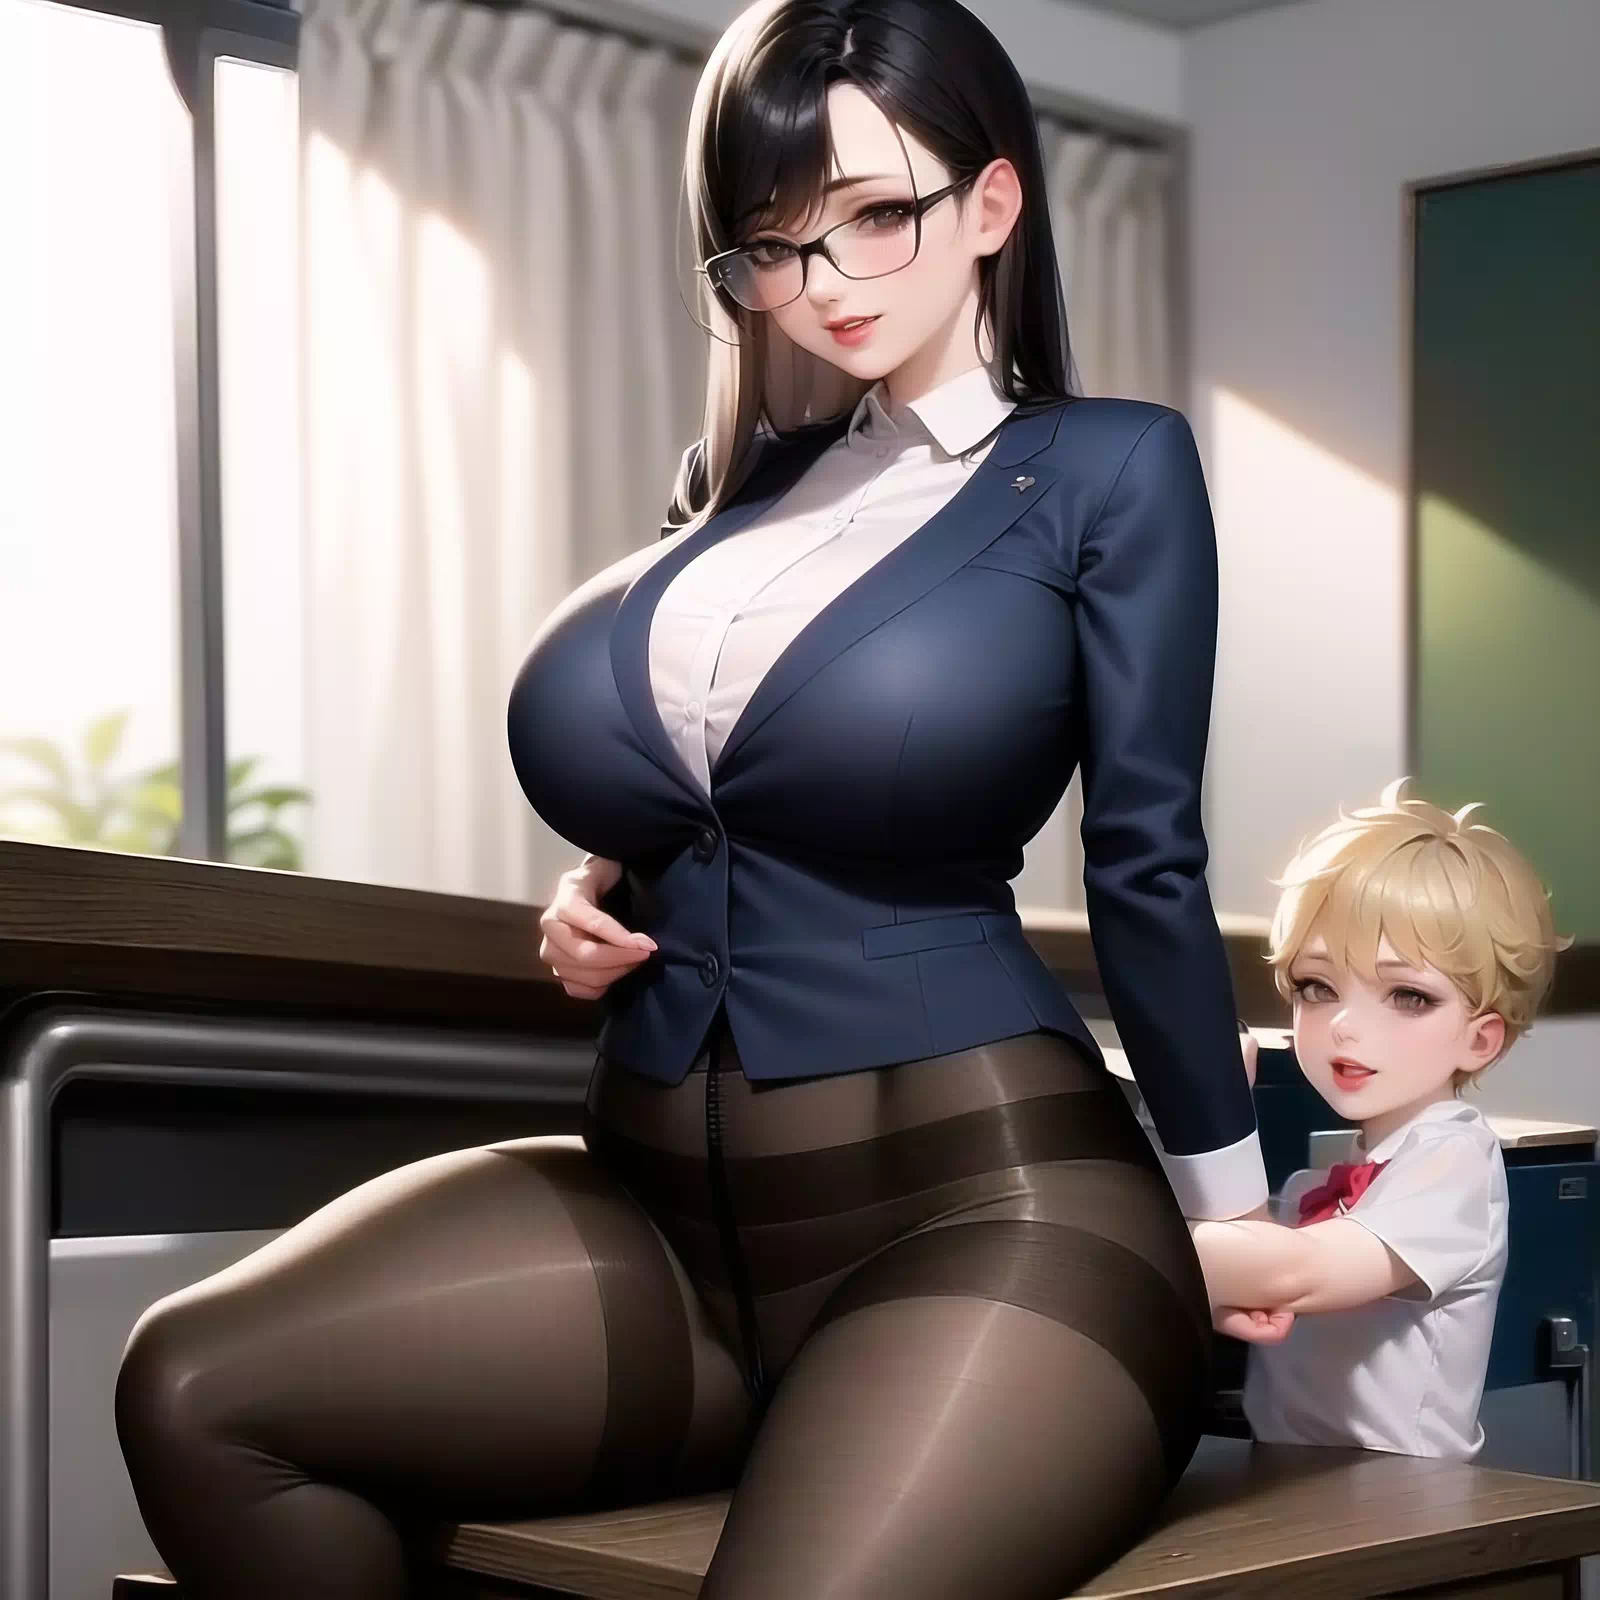 Sexy Teacher and Student Part 2